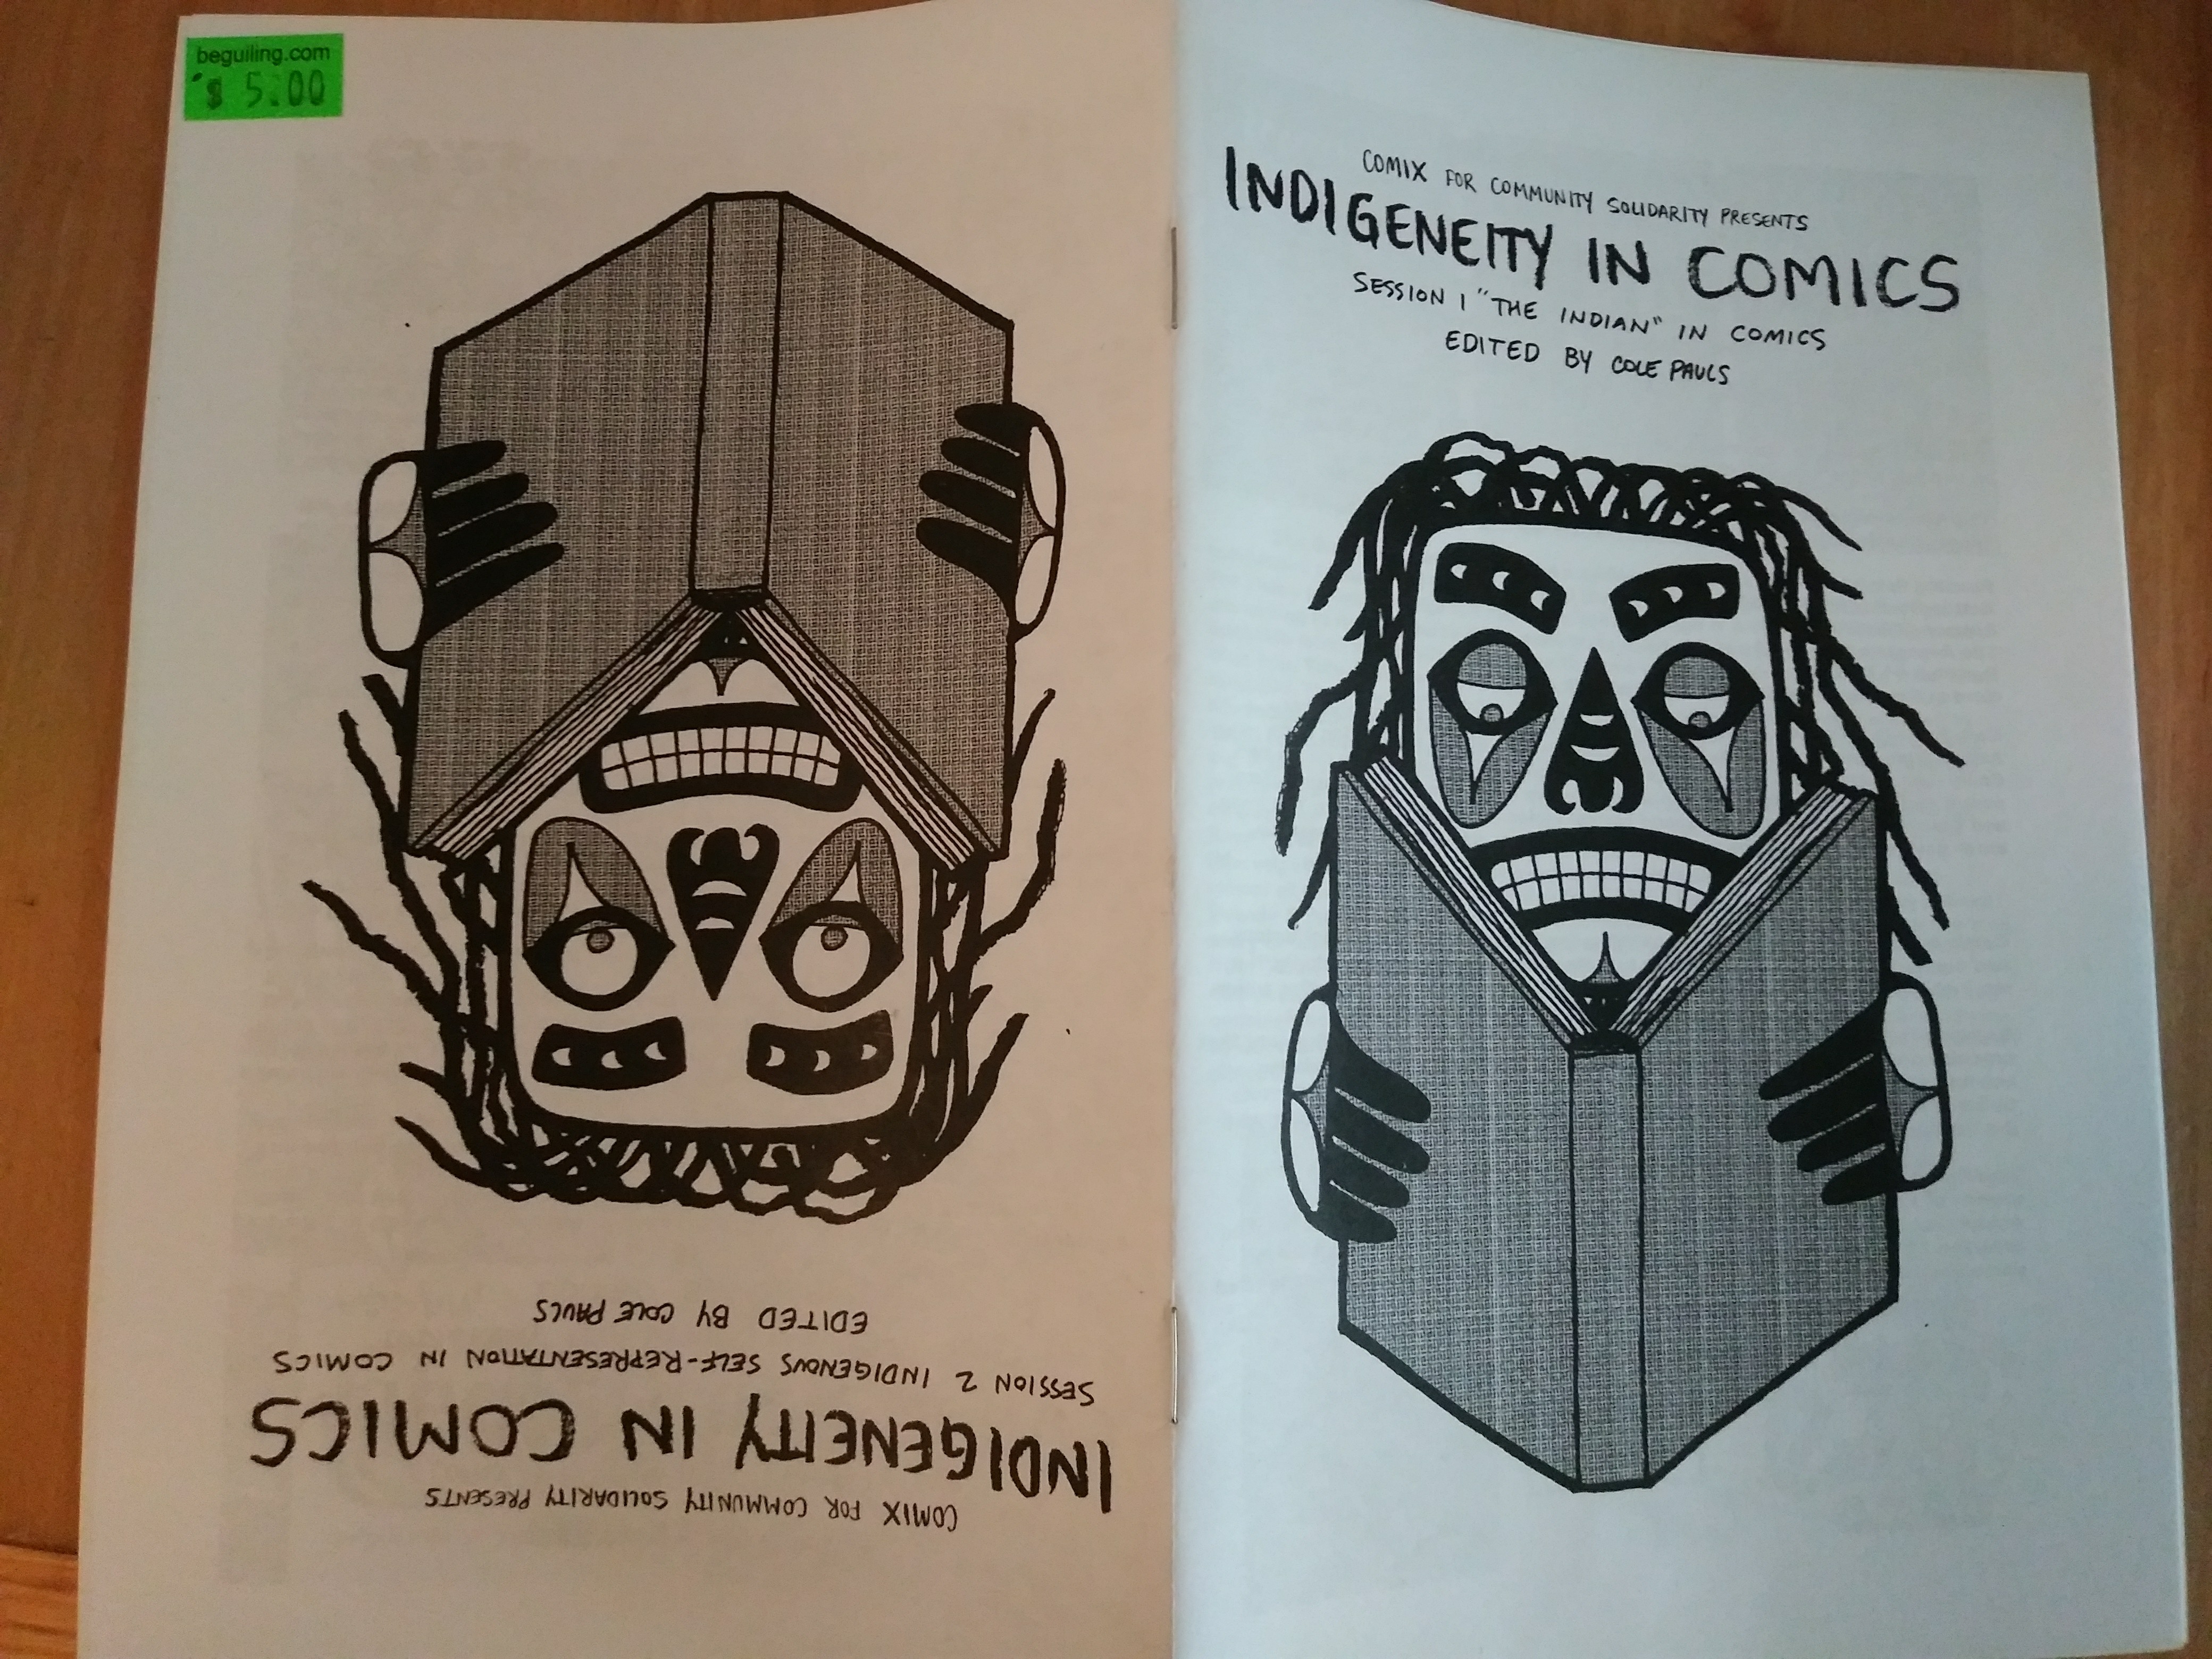 Indigeneity in Comics edited by Cole Pauls